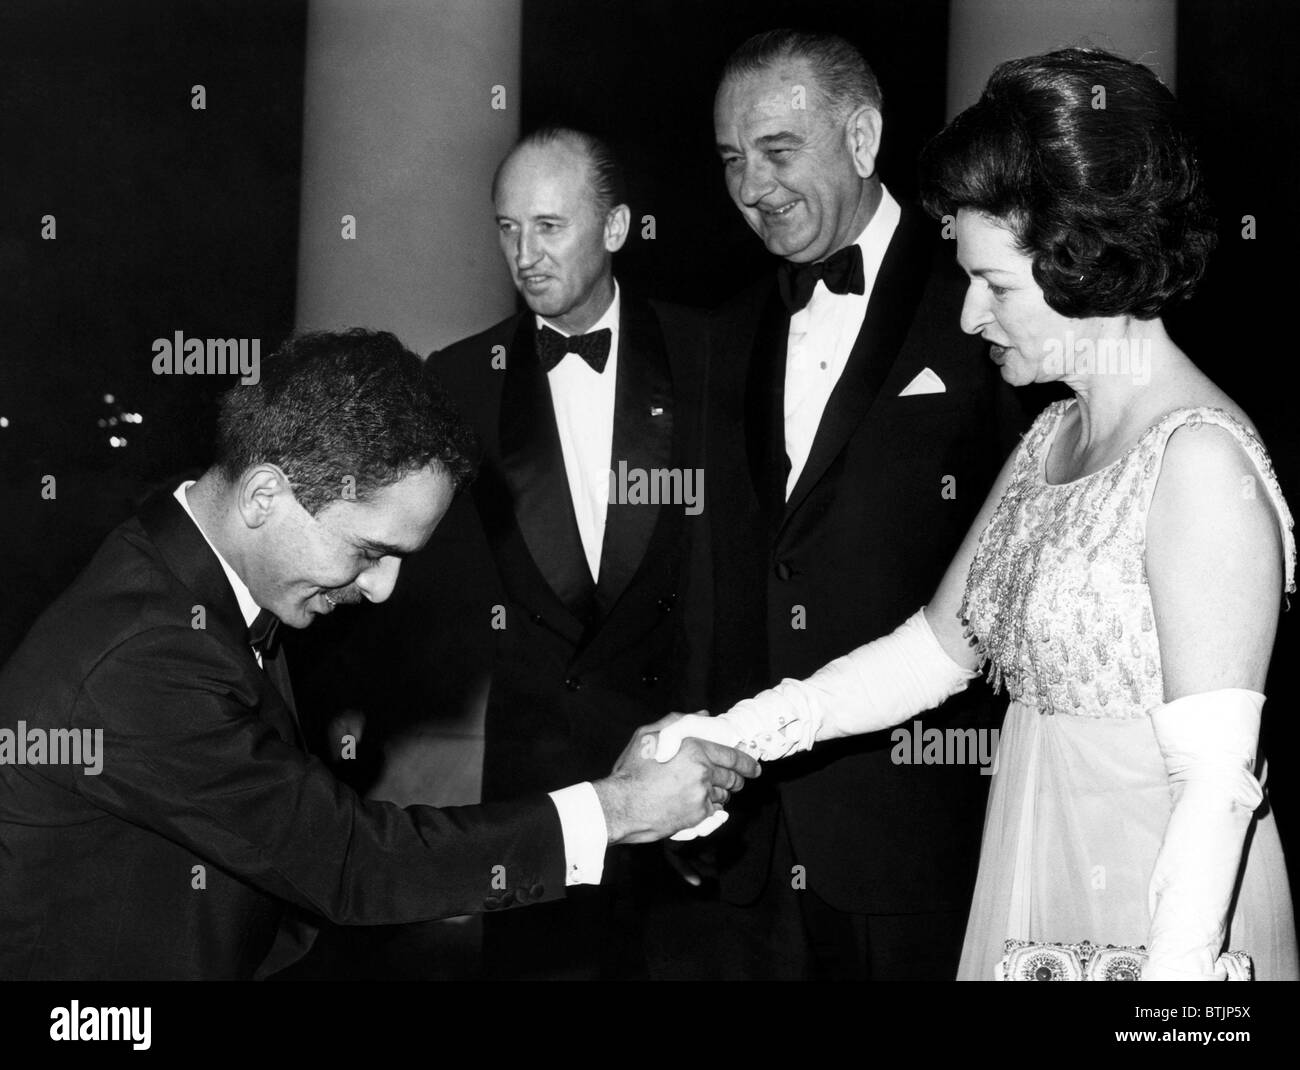 King Hussein of Jordan bows as he is greeted at the White House by Augier Biddle Duke, President Lyndon B.Johnson, and his wife Stock Photo